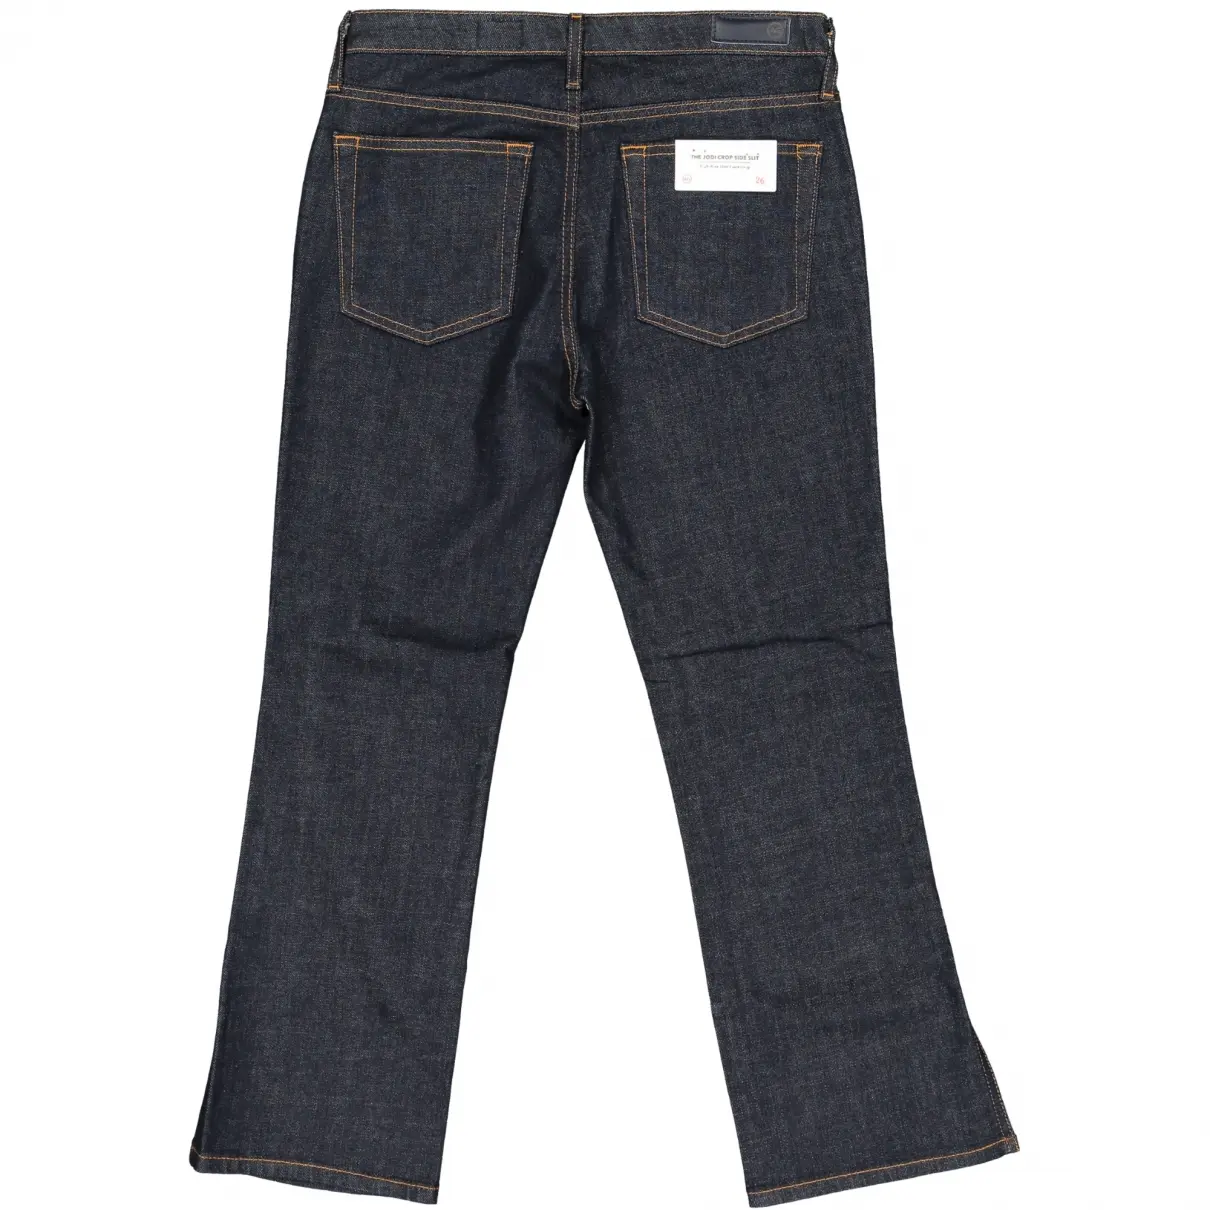 Ag Adriano Goldschmied Slim jeans for sale